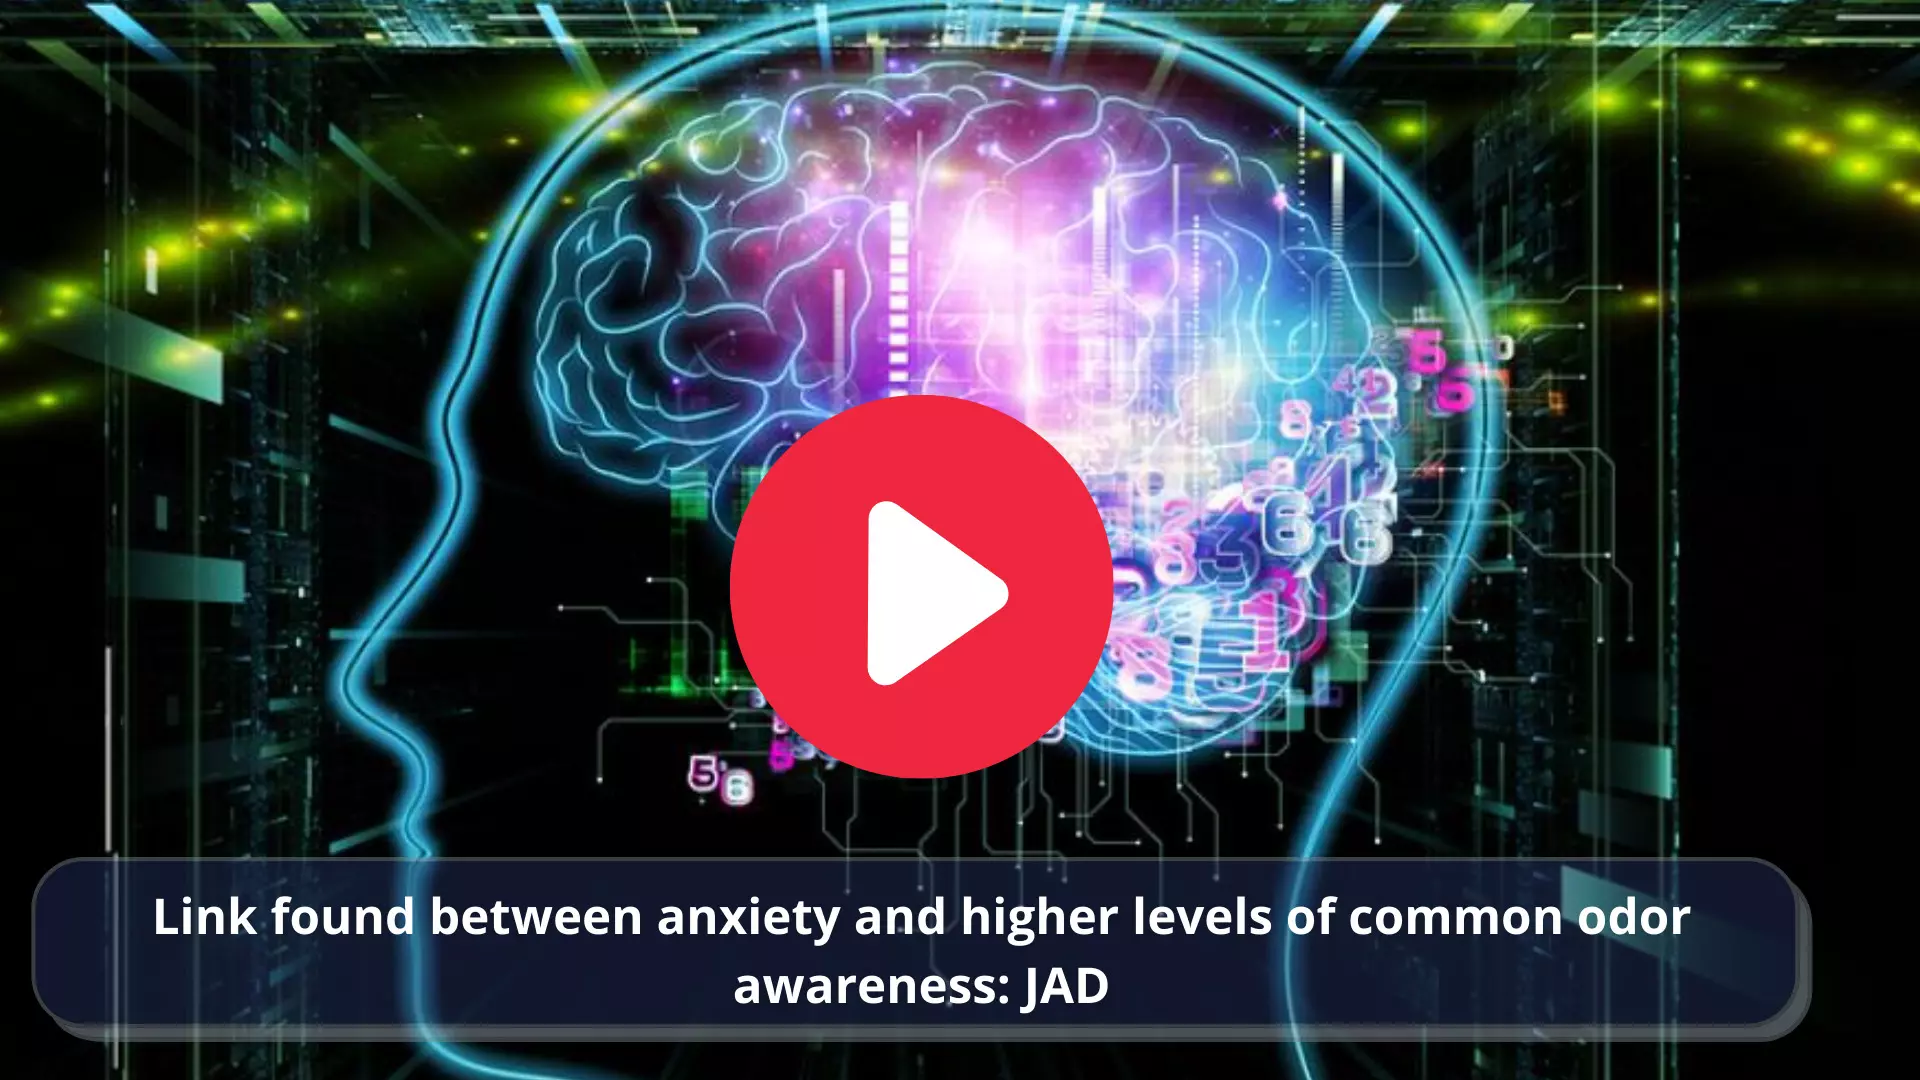 Anxiety and higher levels of common odor awareness interlinked: JAD